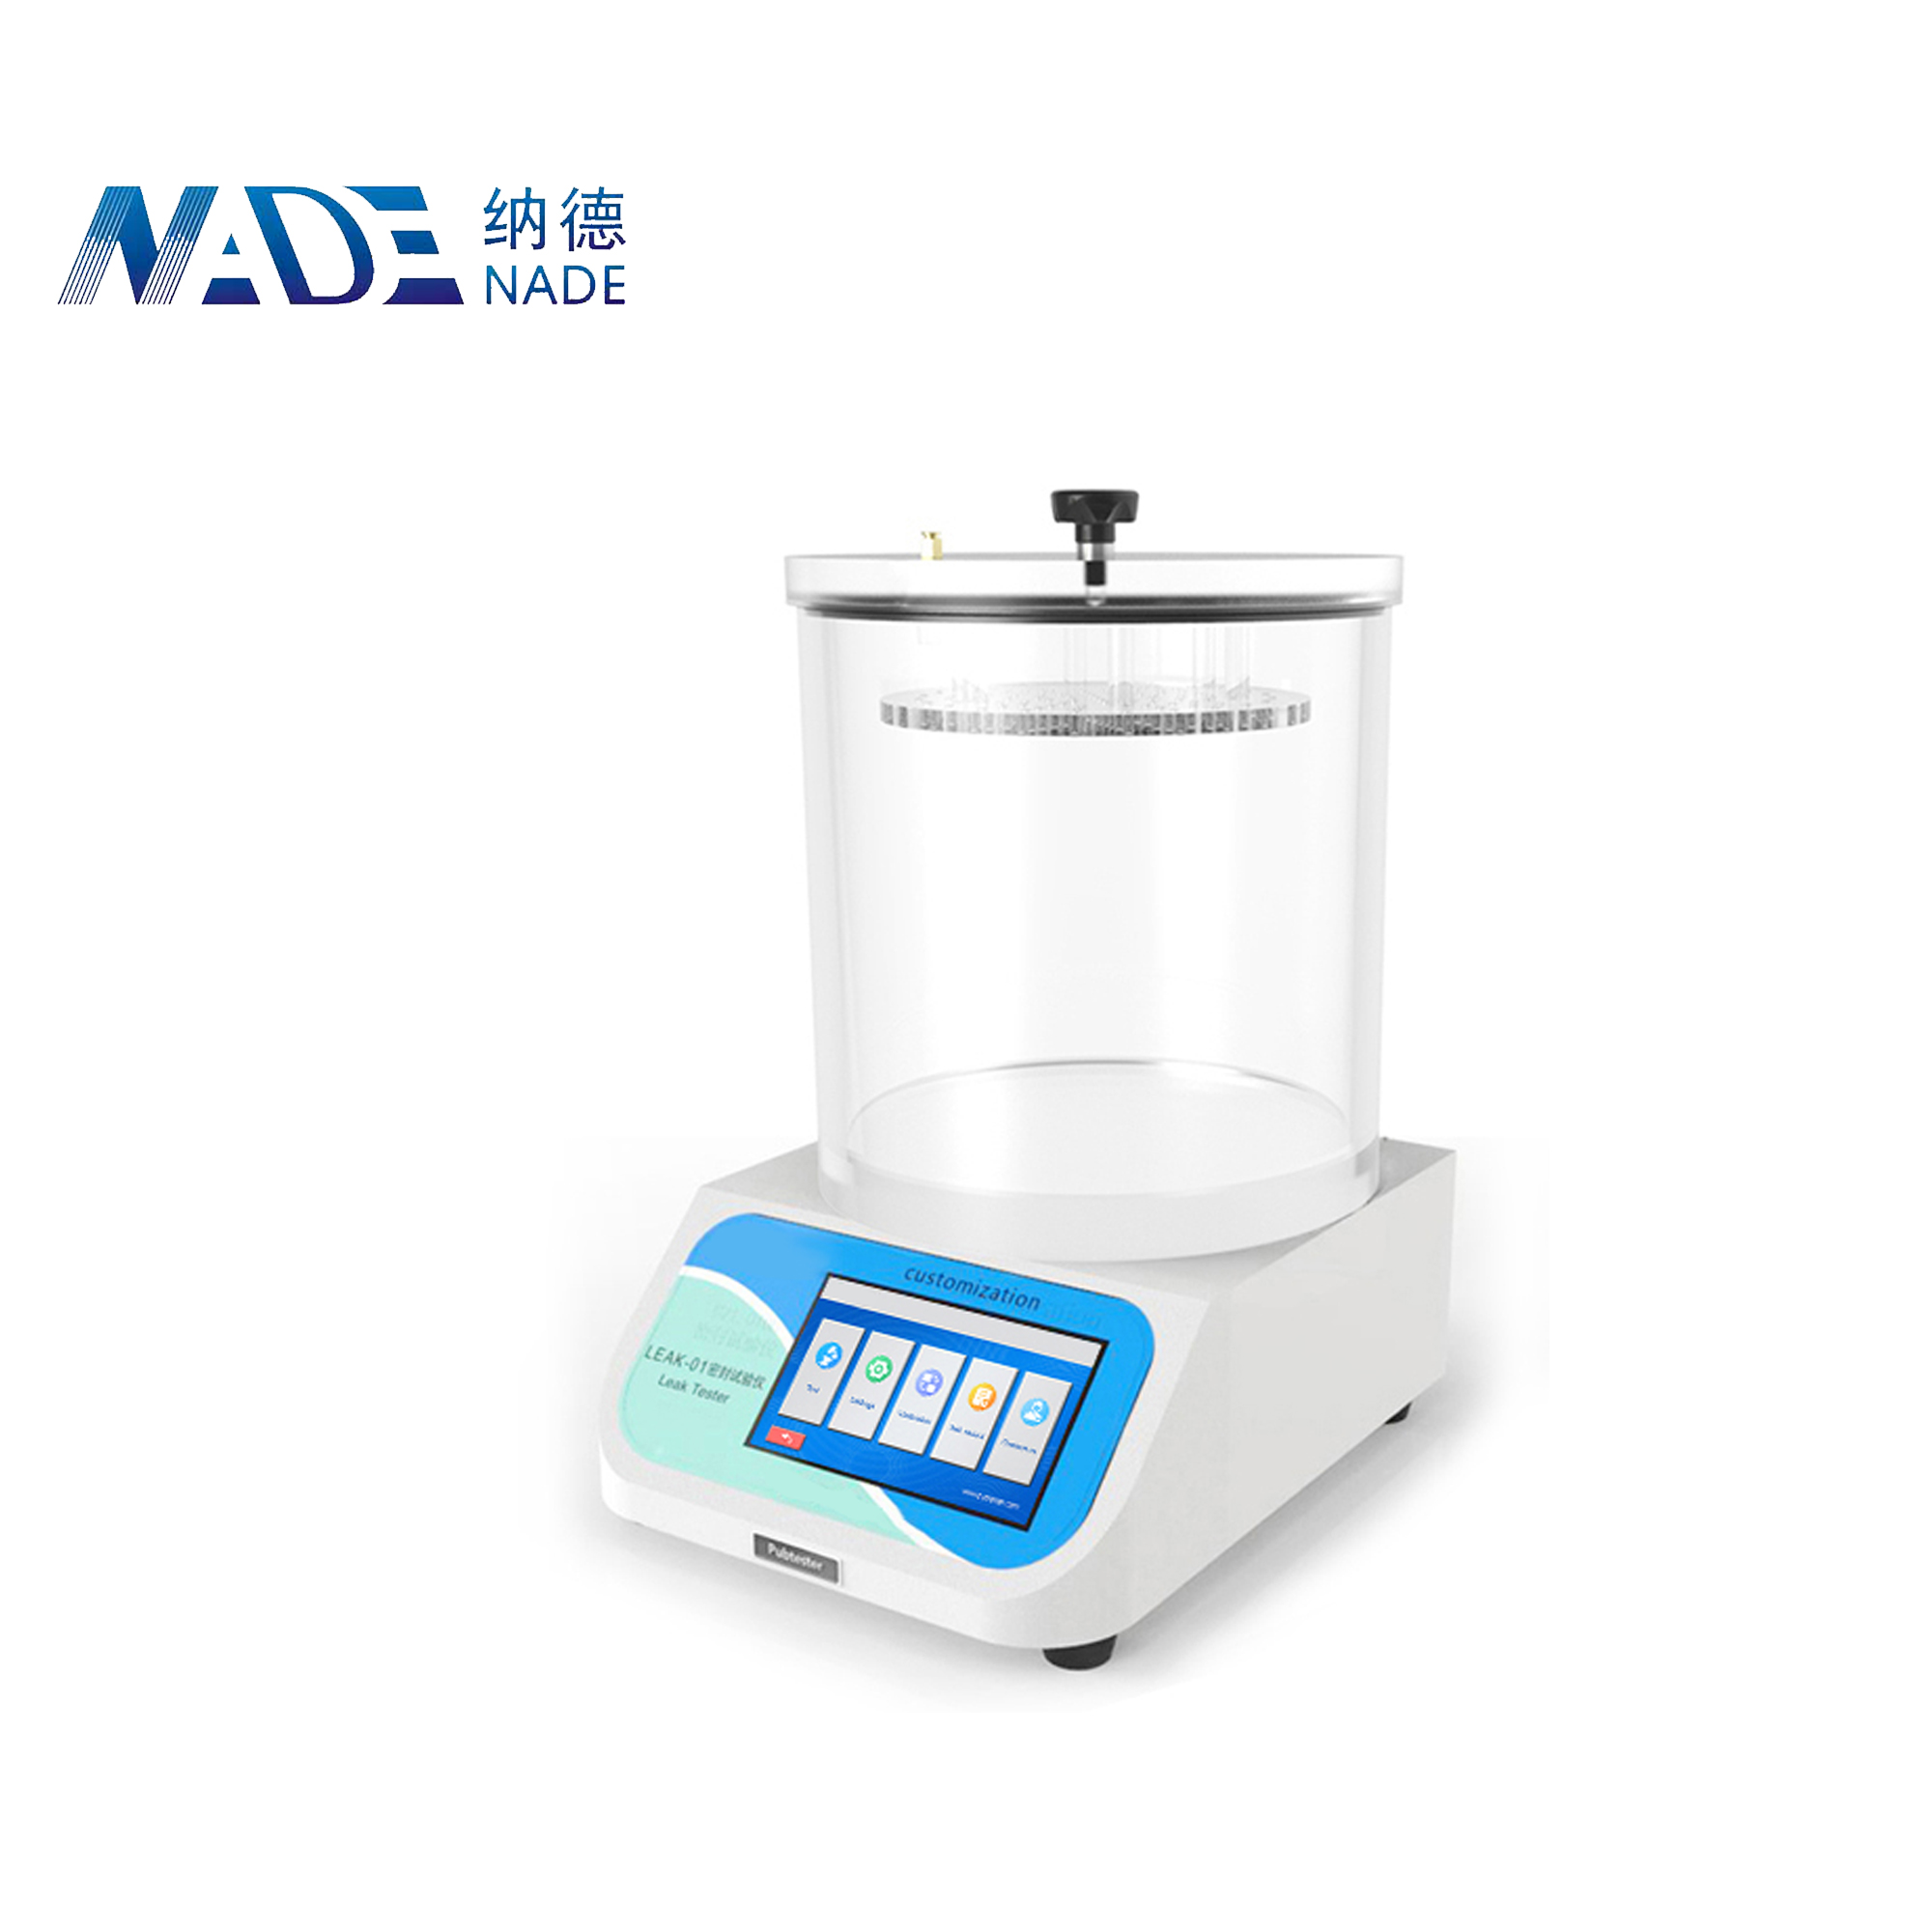 Nade Leak Tester Leak-01test for packaging bags, bottles, cans and boxes with negative pressure method